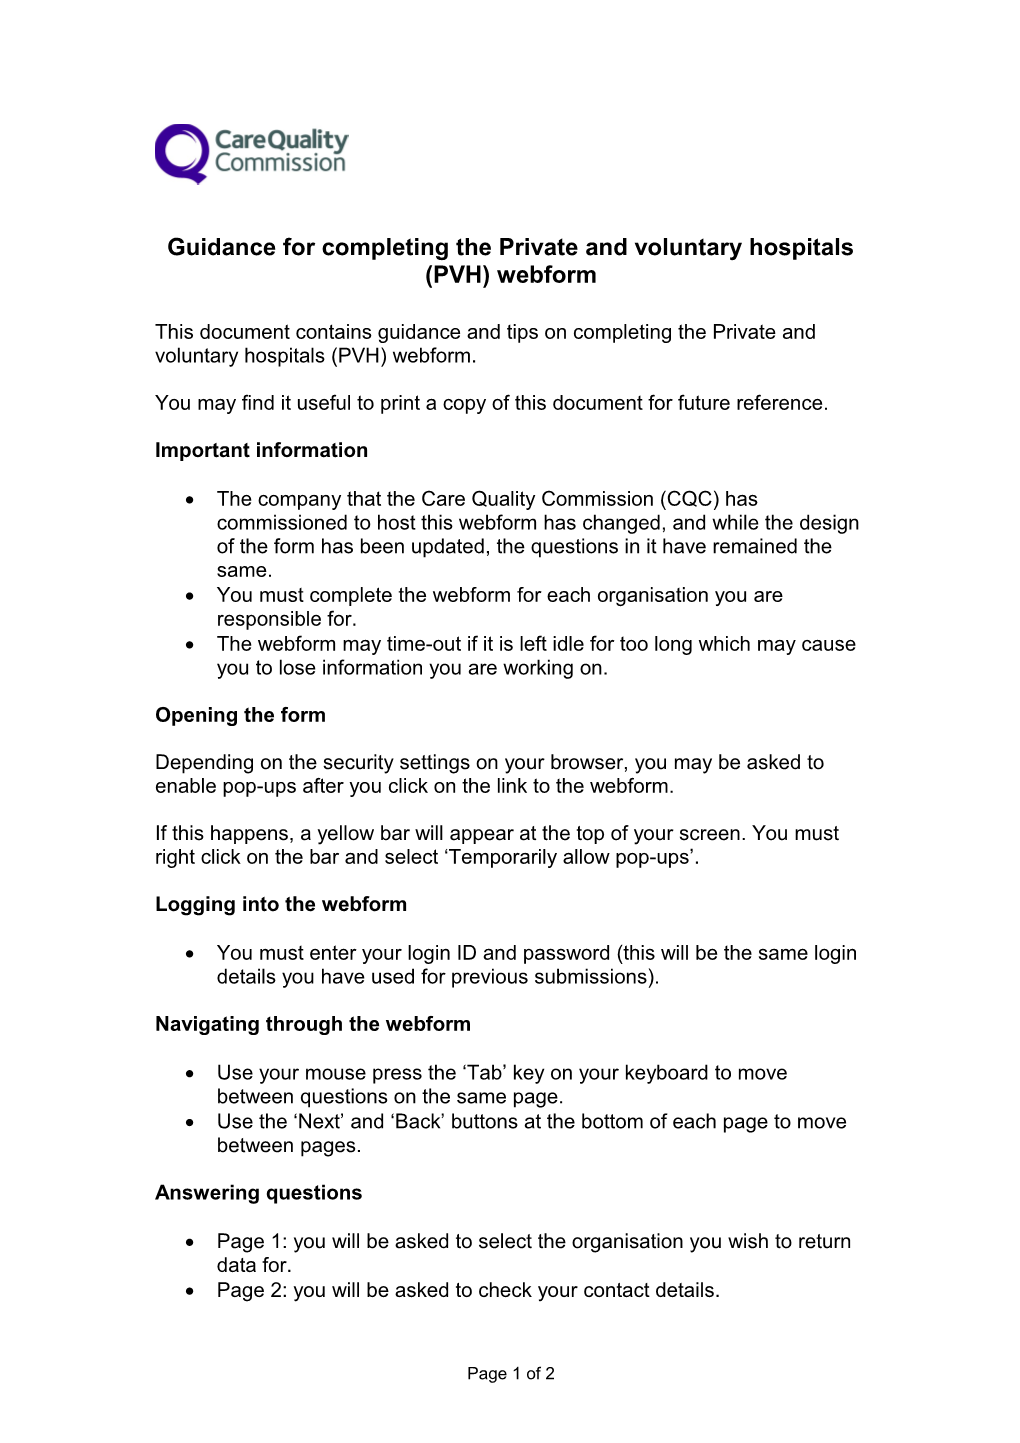 Guidance for Completing the Private and Voluntary Hospitals (PVH) Webform